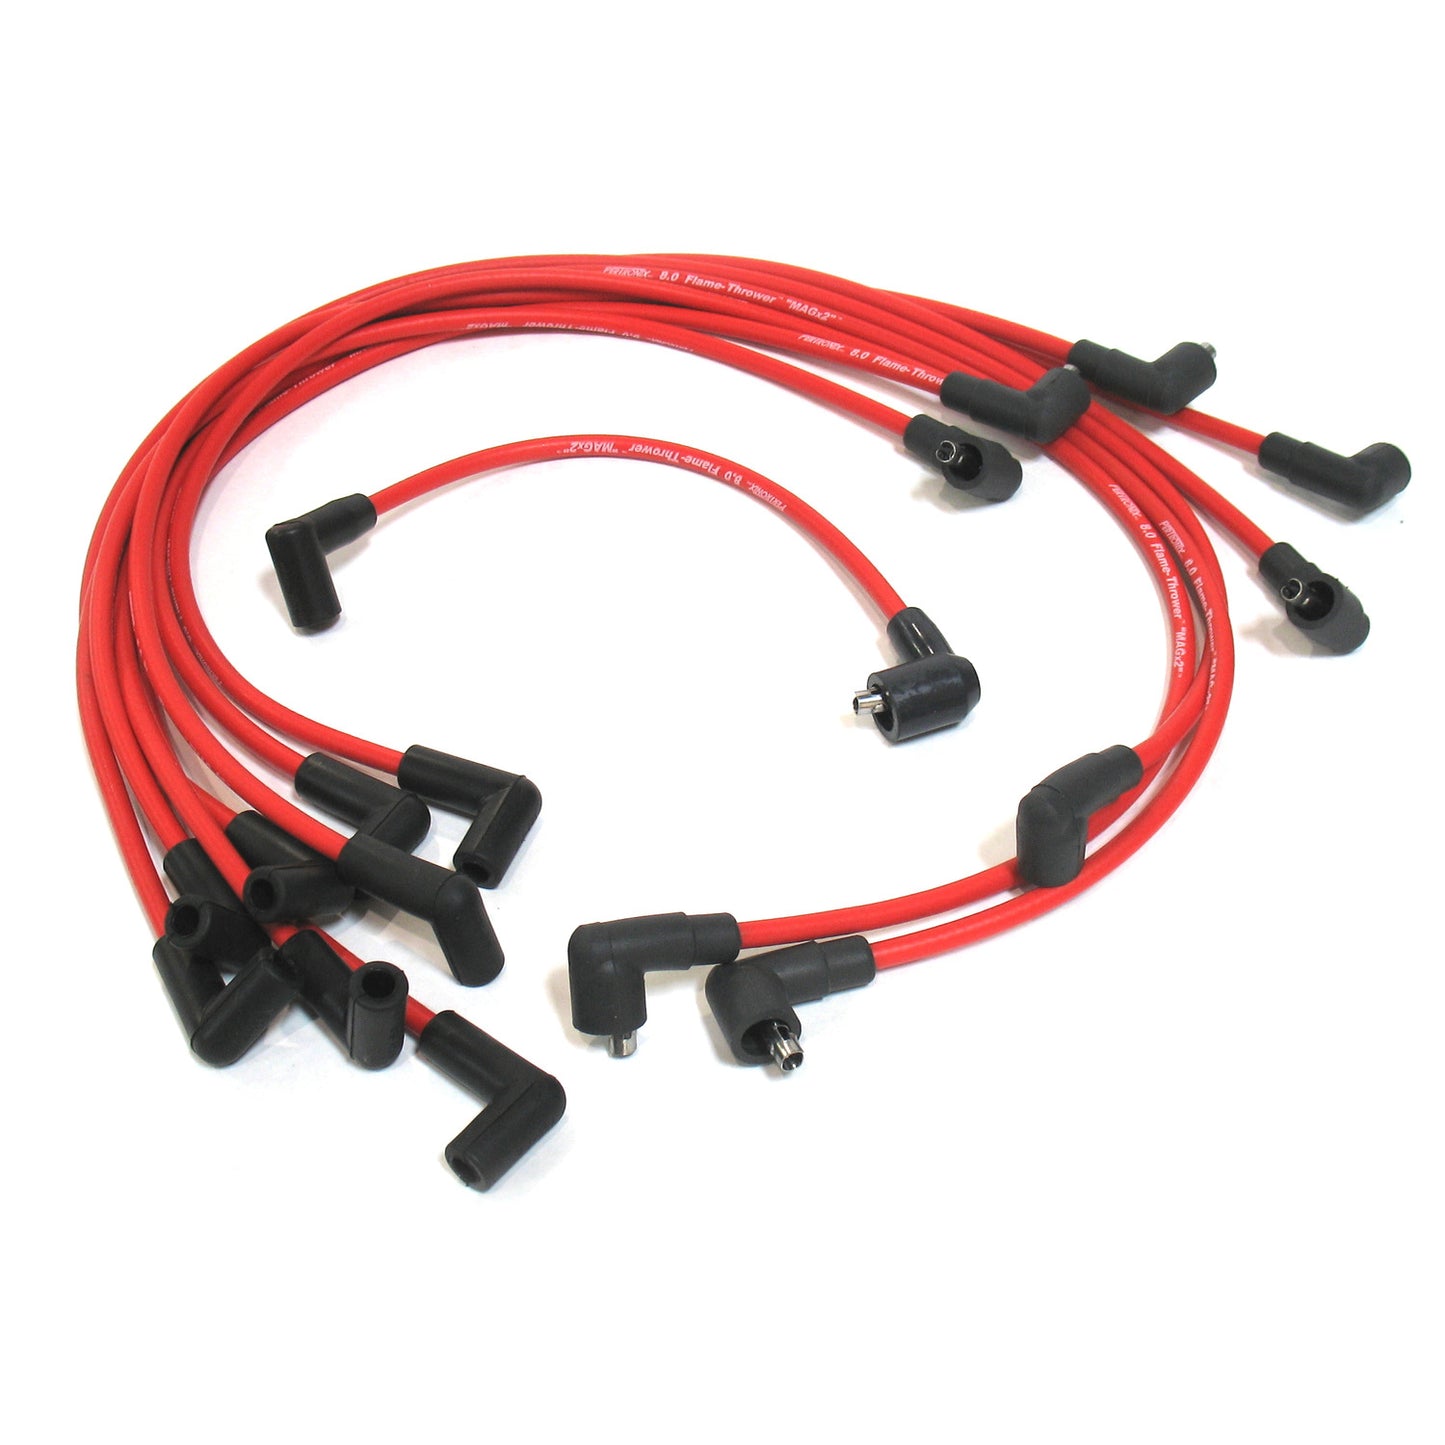 PerTronix 808450 Flame-Thrower Spark Plug Wires 8 cyl 8mm